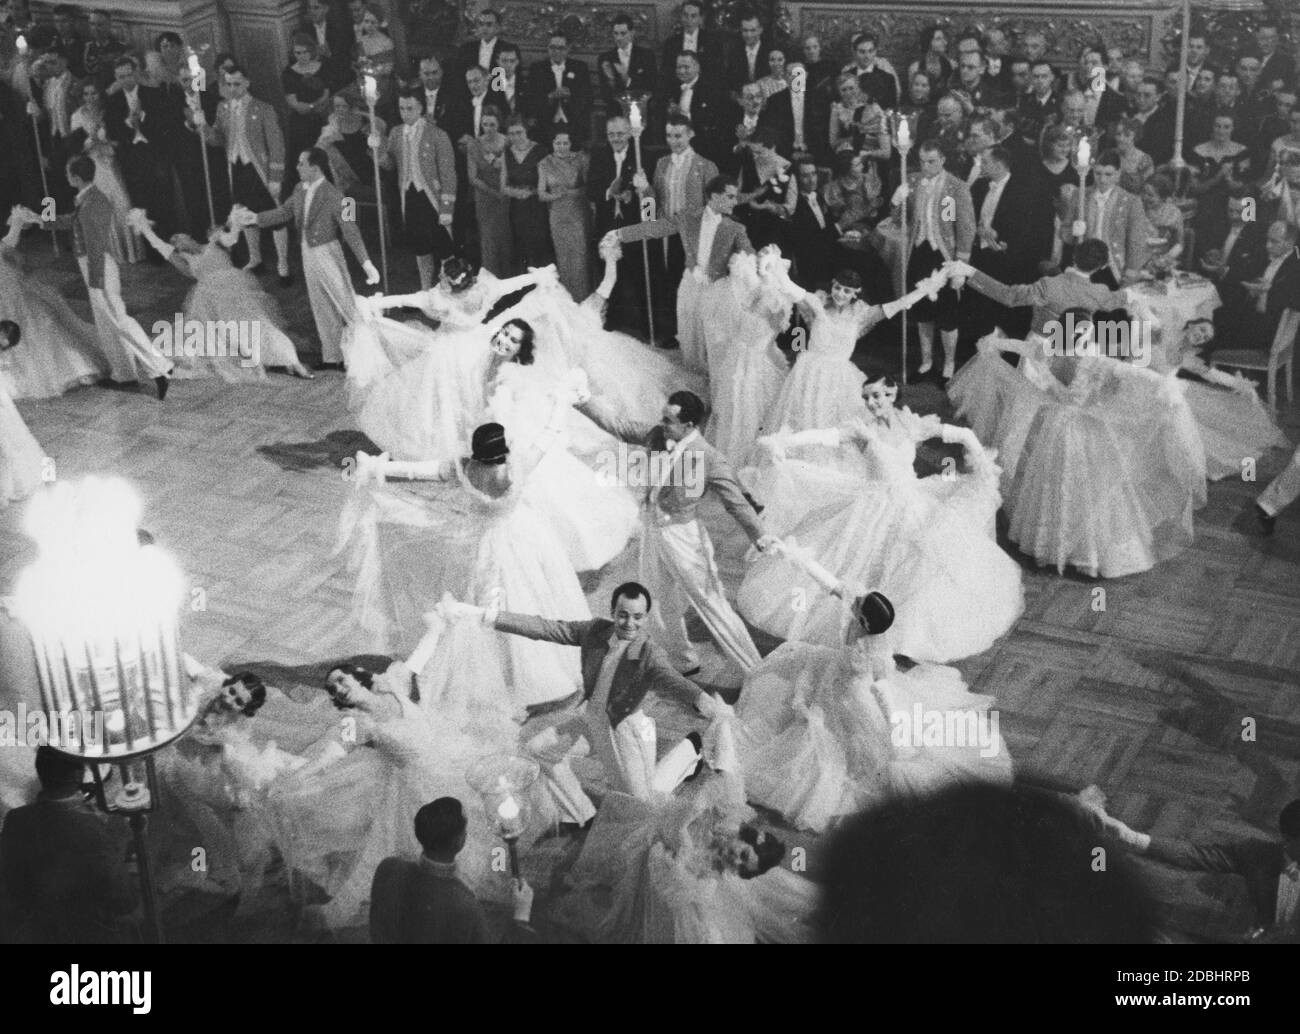 On January 12, 1936, the Opera Ball of the Prussian State Theater took place at the Staatsoper Unter den Linden. The photo shows a performance of the State Opera Ballet. Stock Photo